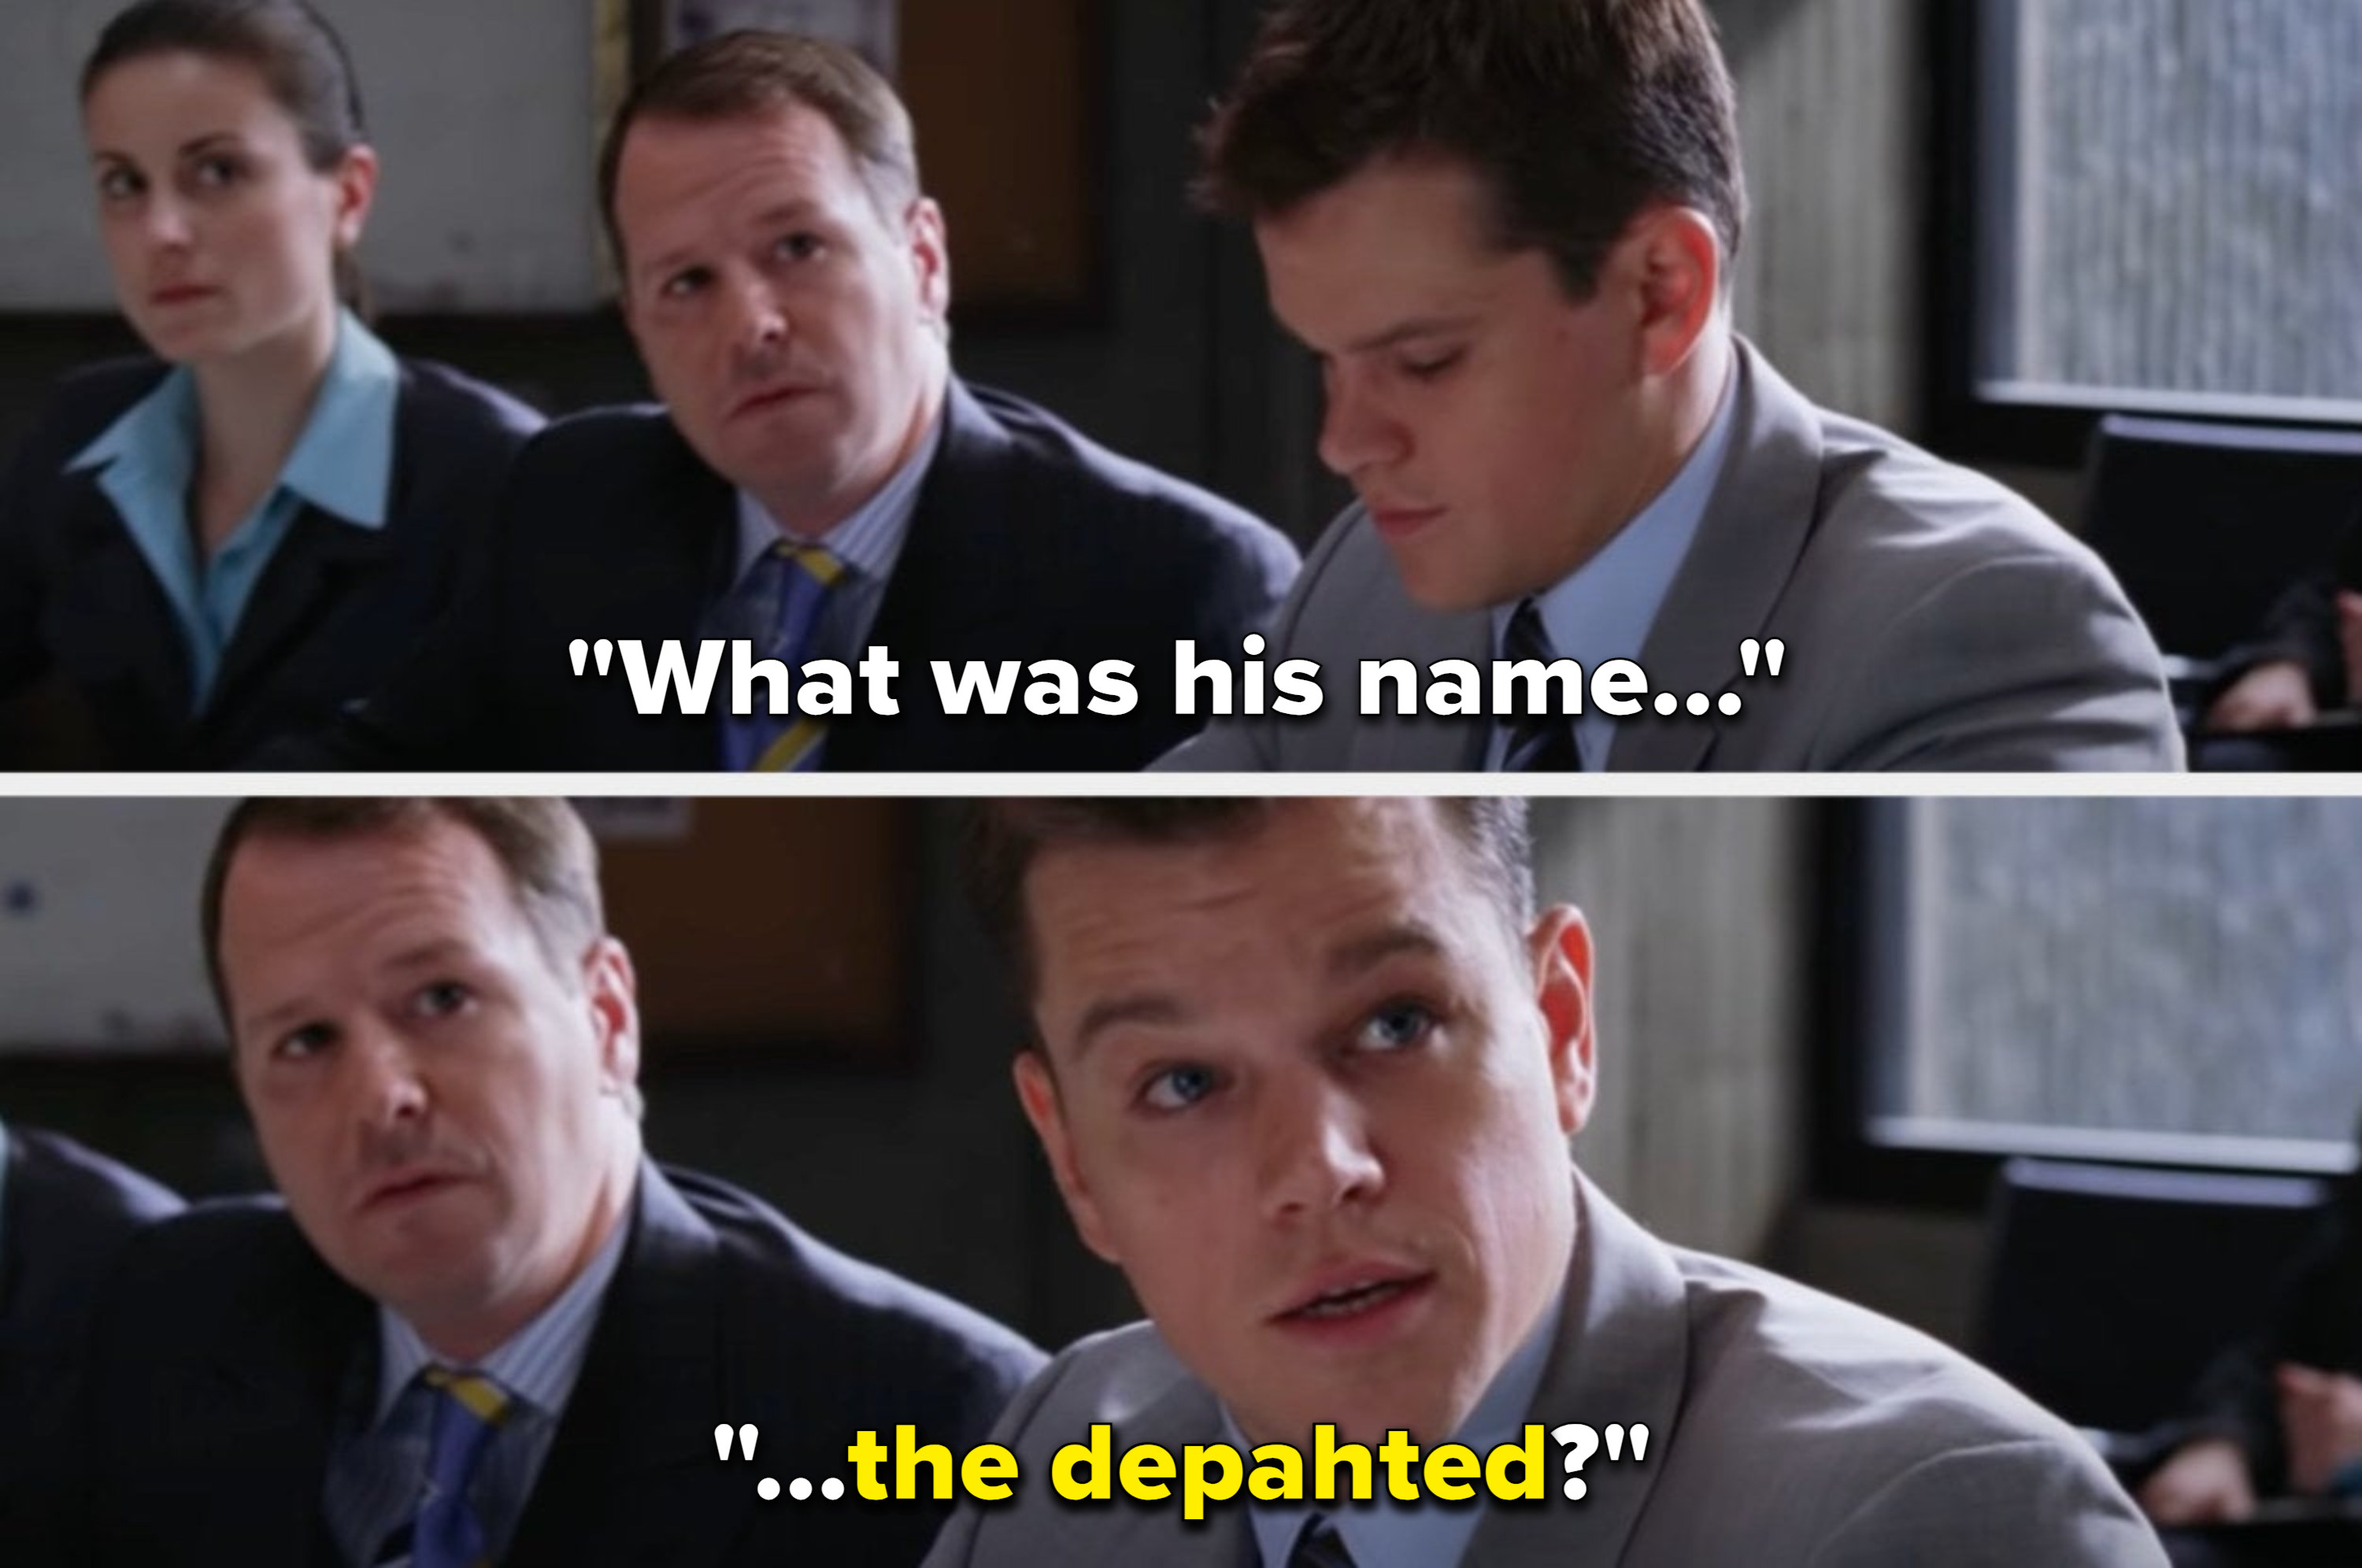 Matt Damon says, &quot;What was his name, the departed?&quot;